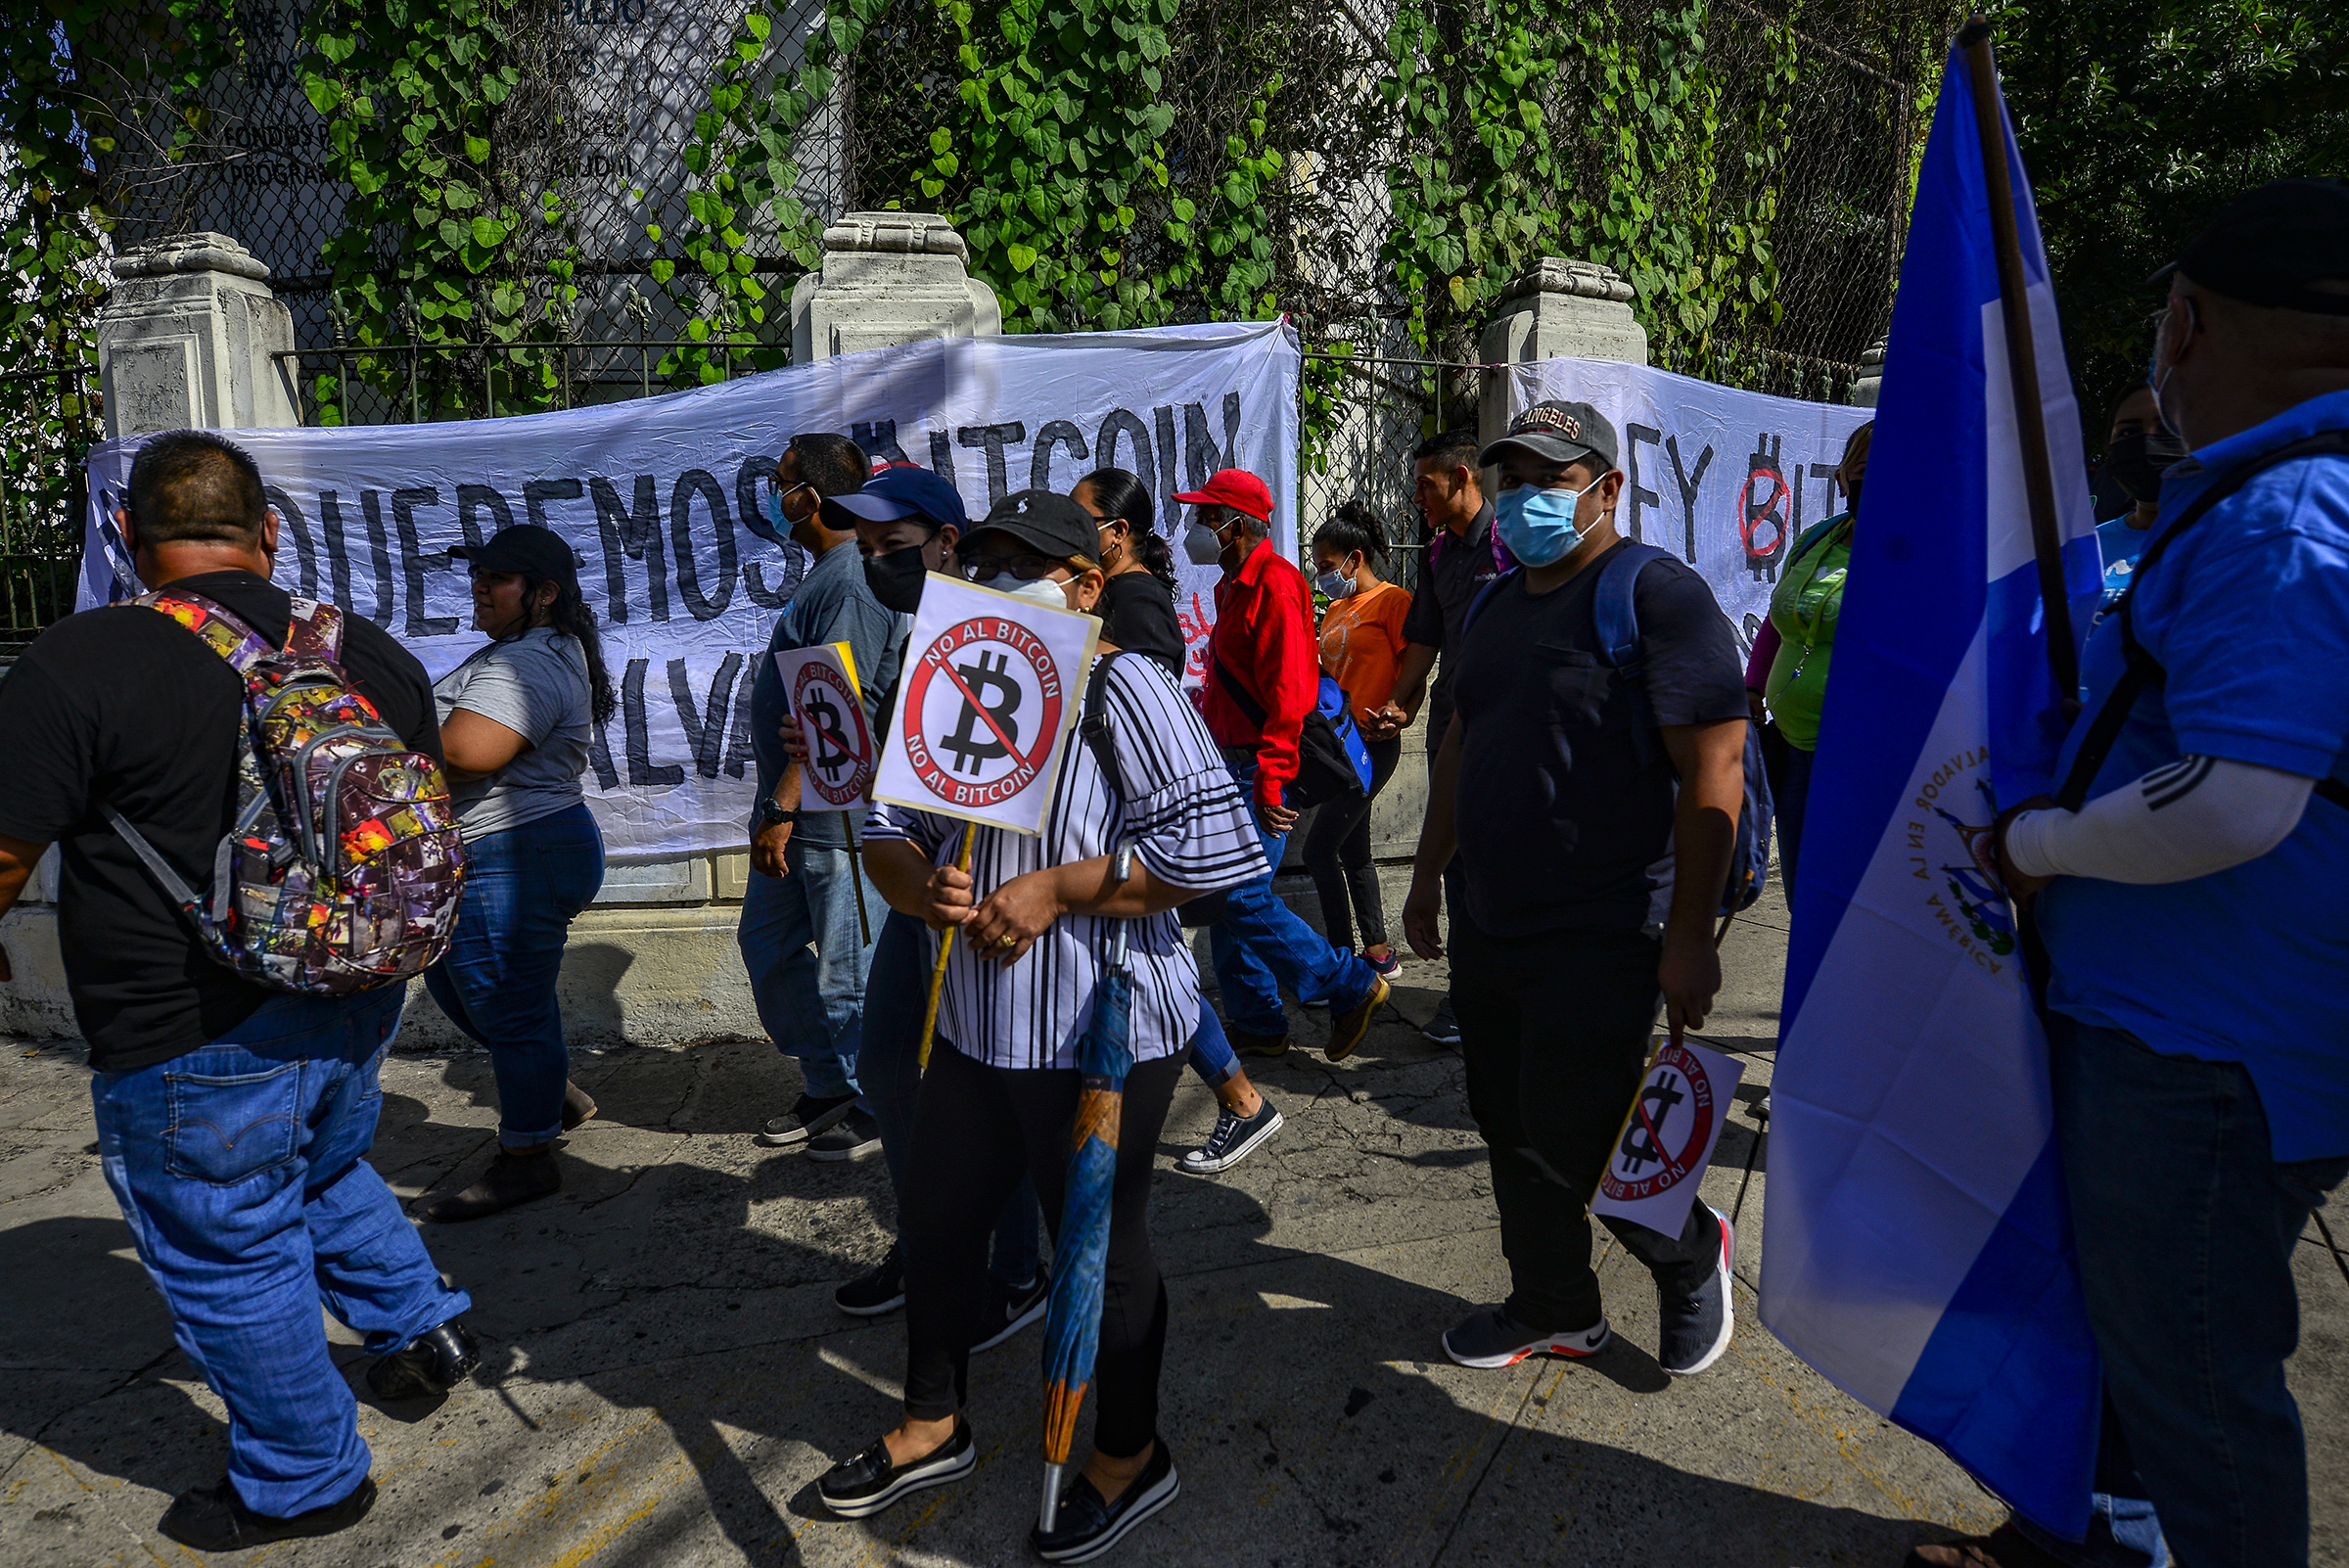 Demonstrators hold signs during a protest against President Bukele and bitcoin in San Salvador on Sept. 15, 2021.